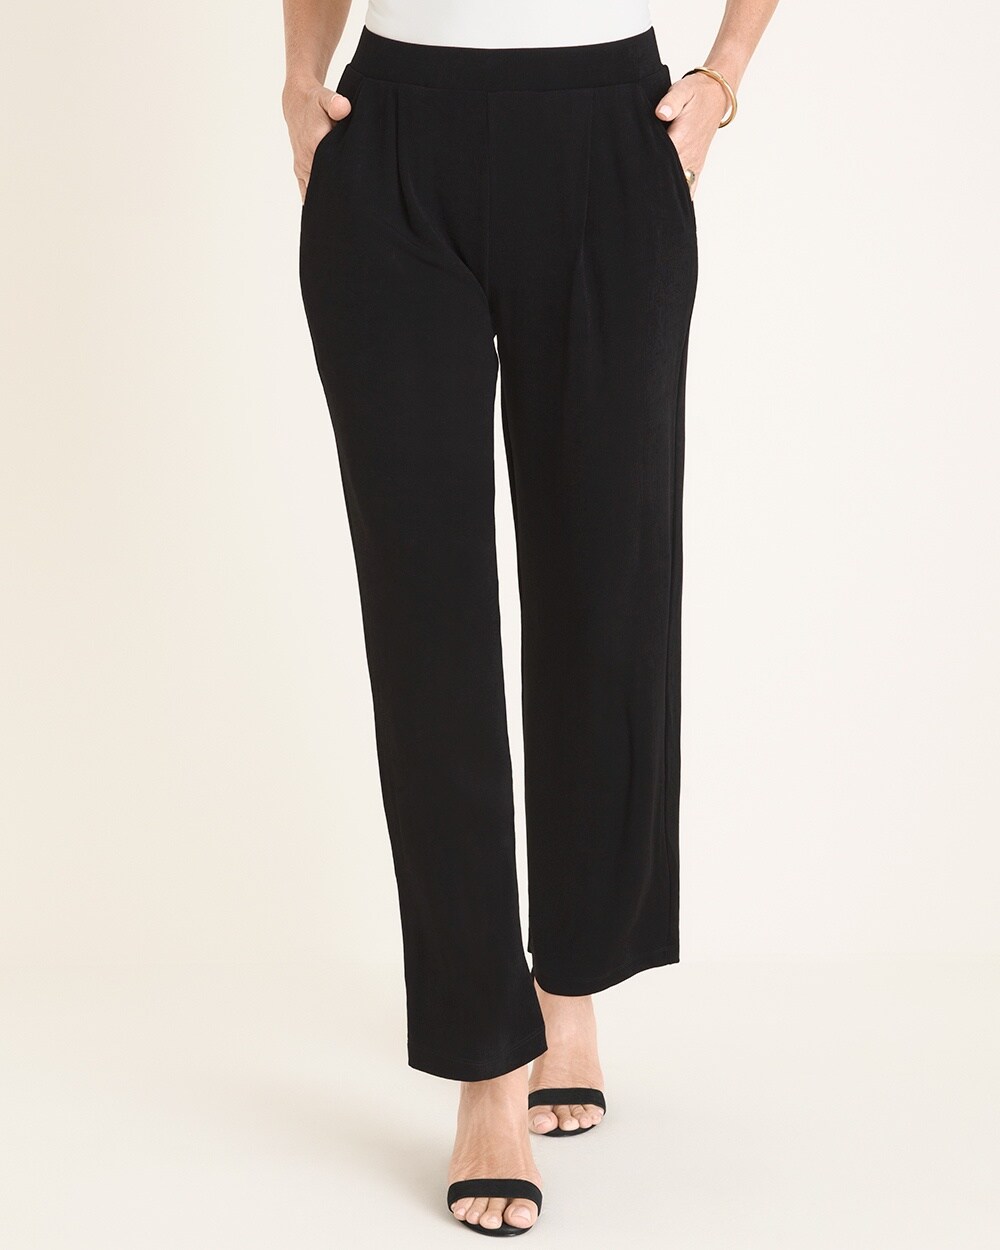 Travelers Classic Striped Pants - Chico's